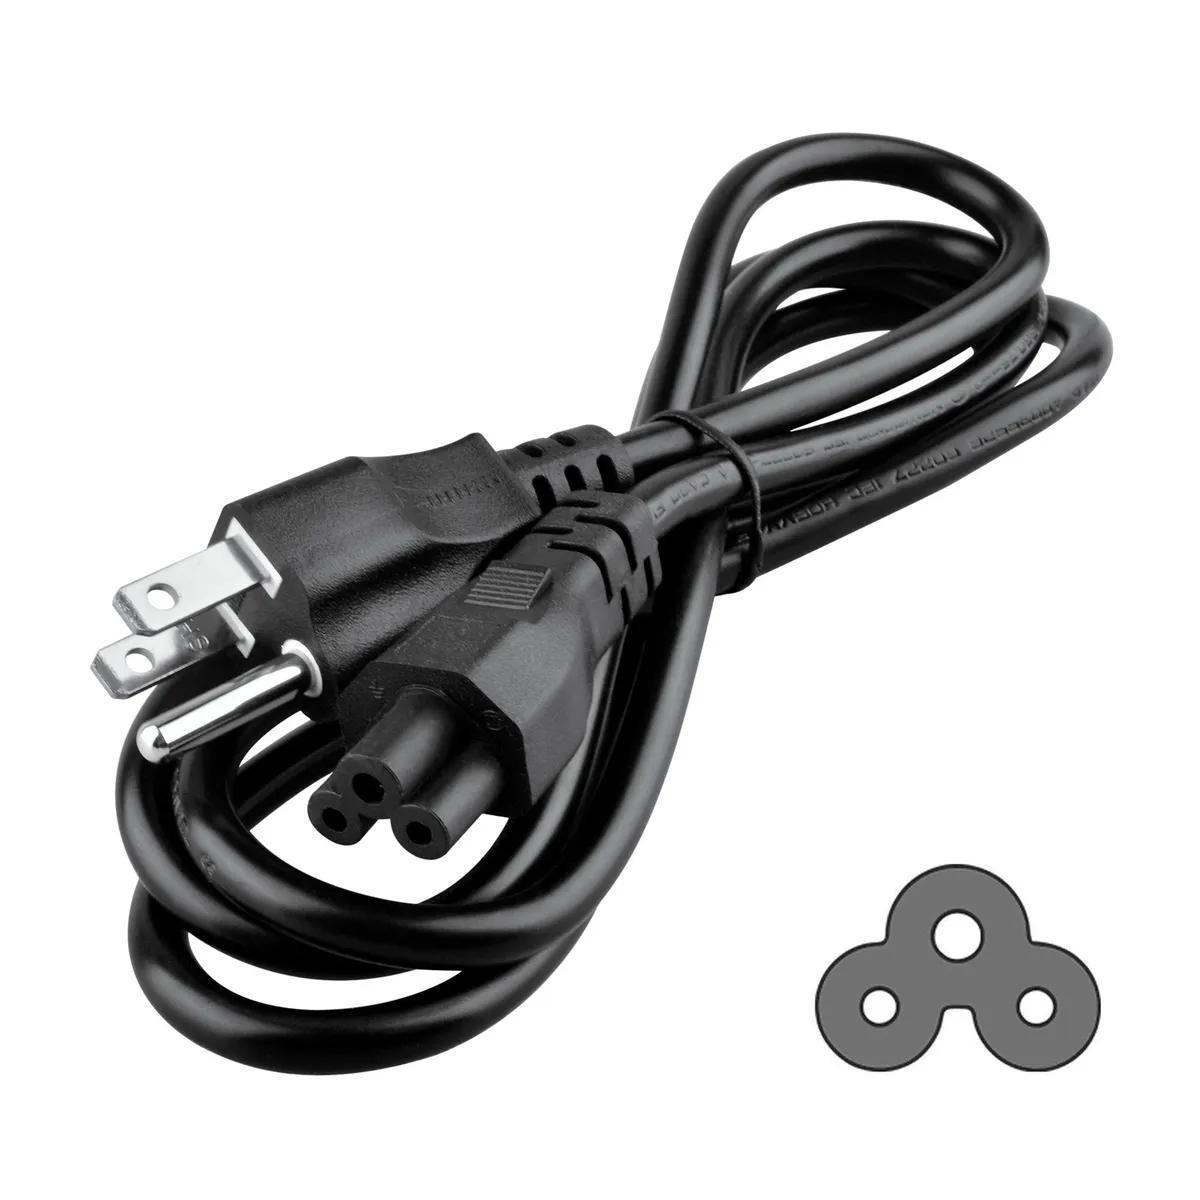 hewlett packard power cord - What charging cable does HP use